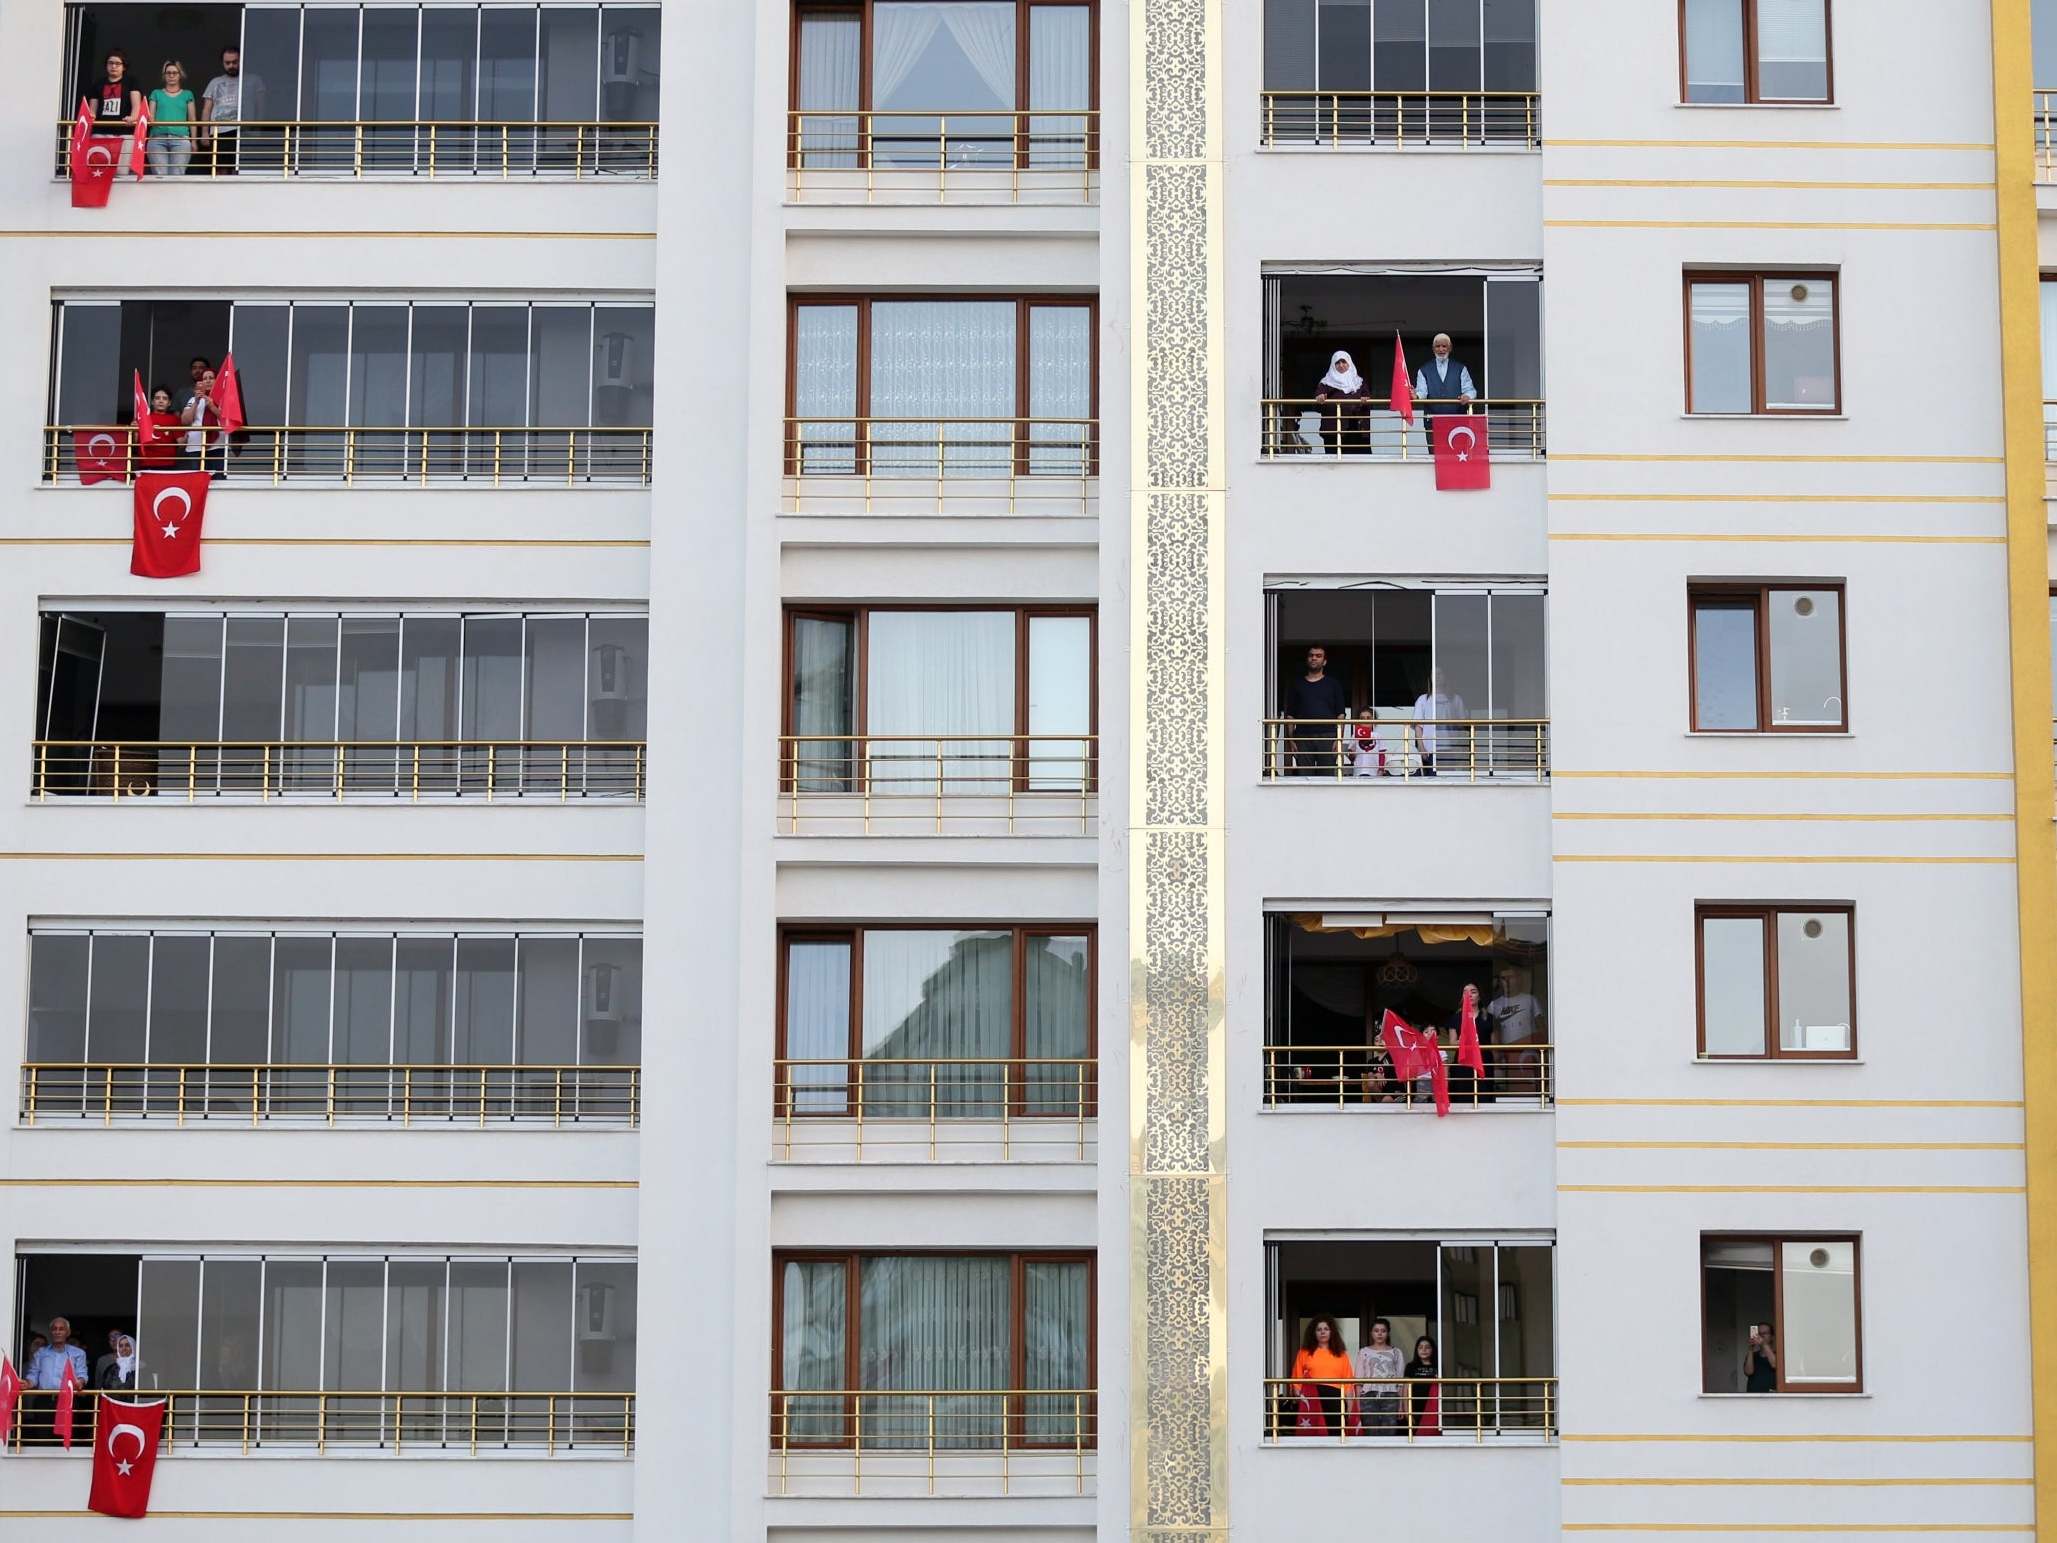 A man has been detained for hanging a towel with a UK flag from a balcony while others display Turkish flags during a national holiday